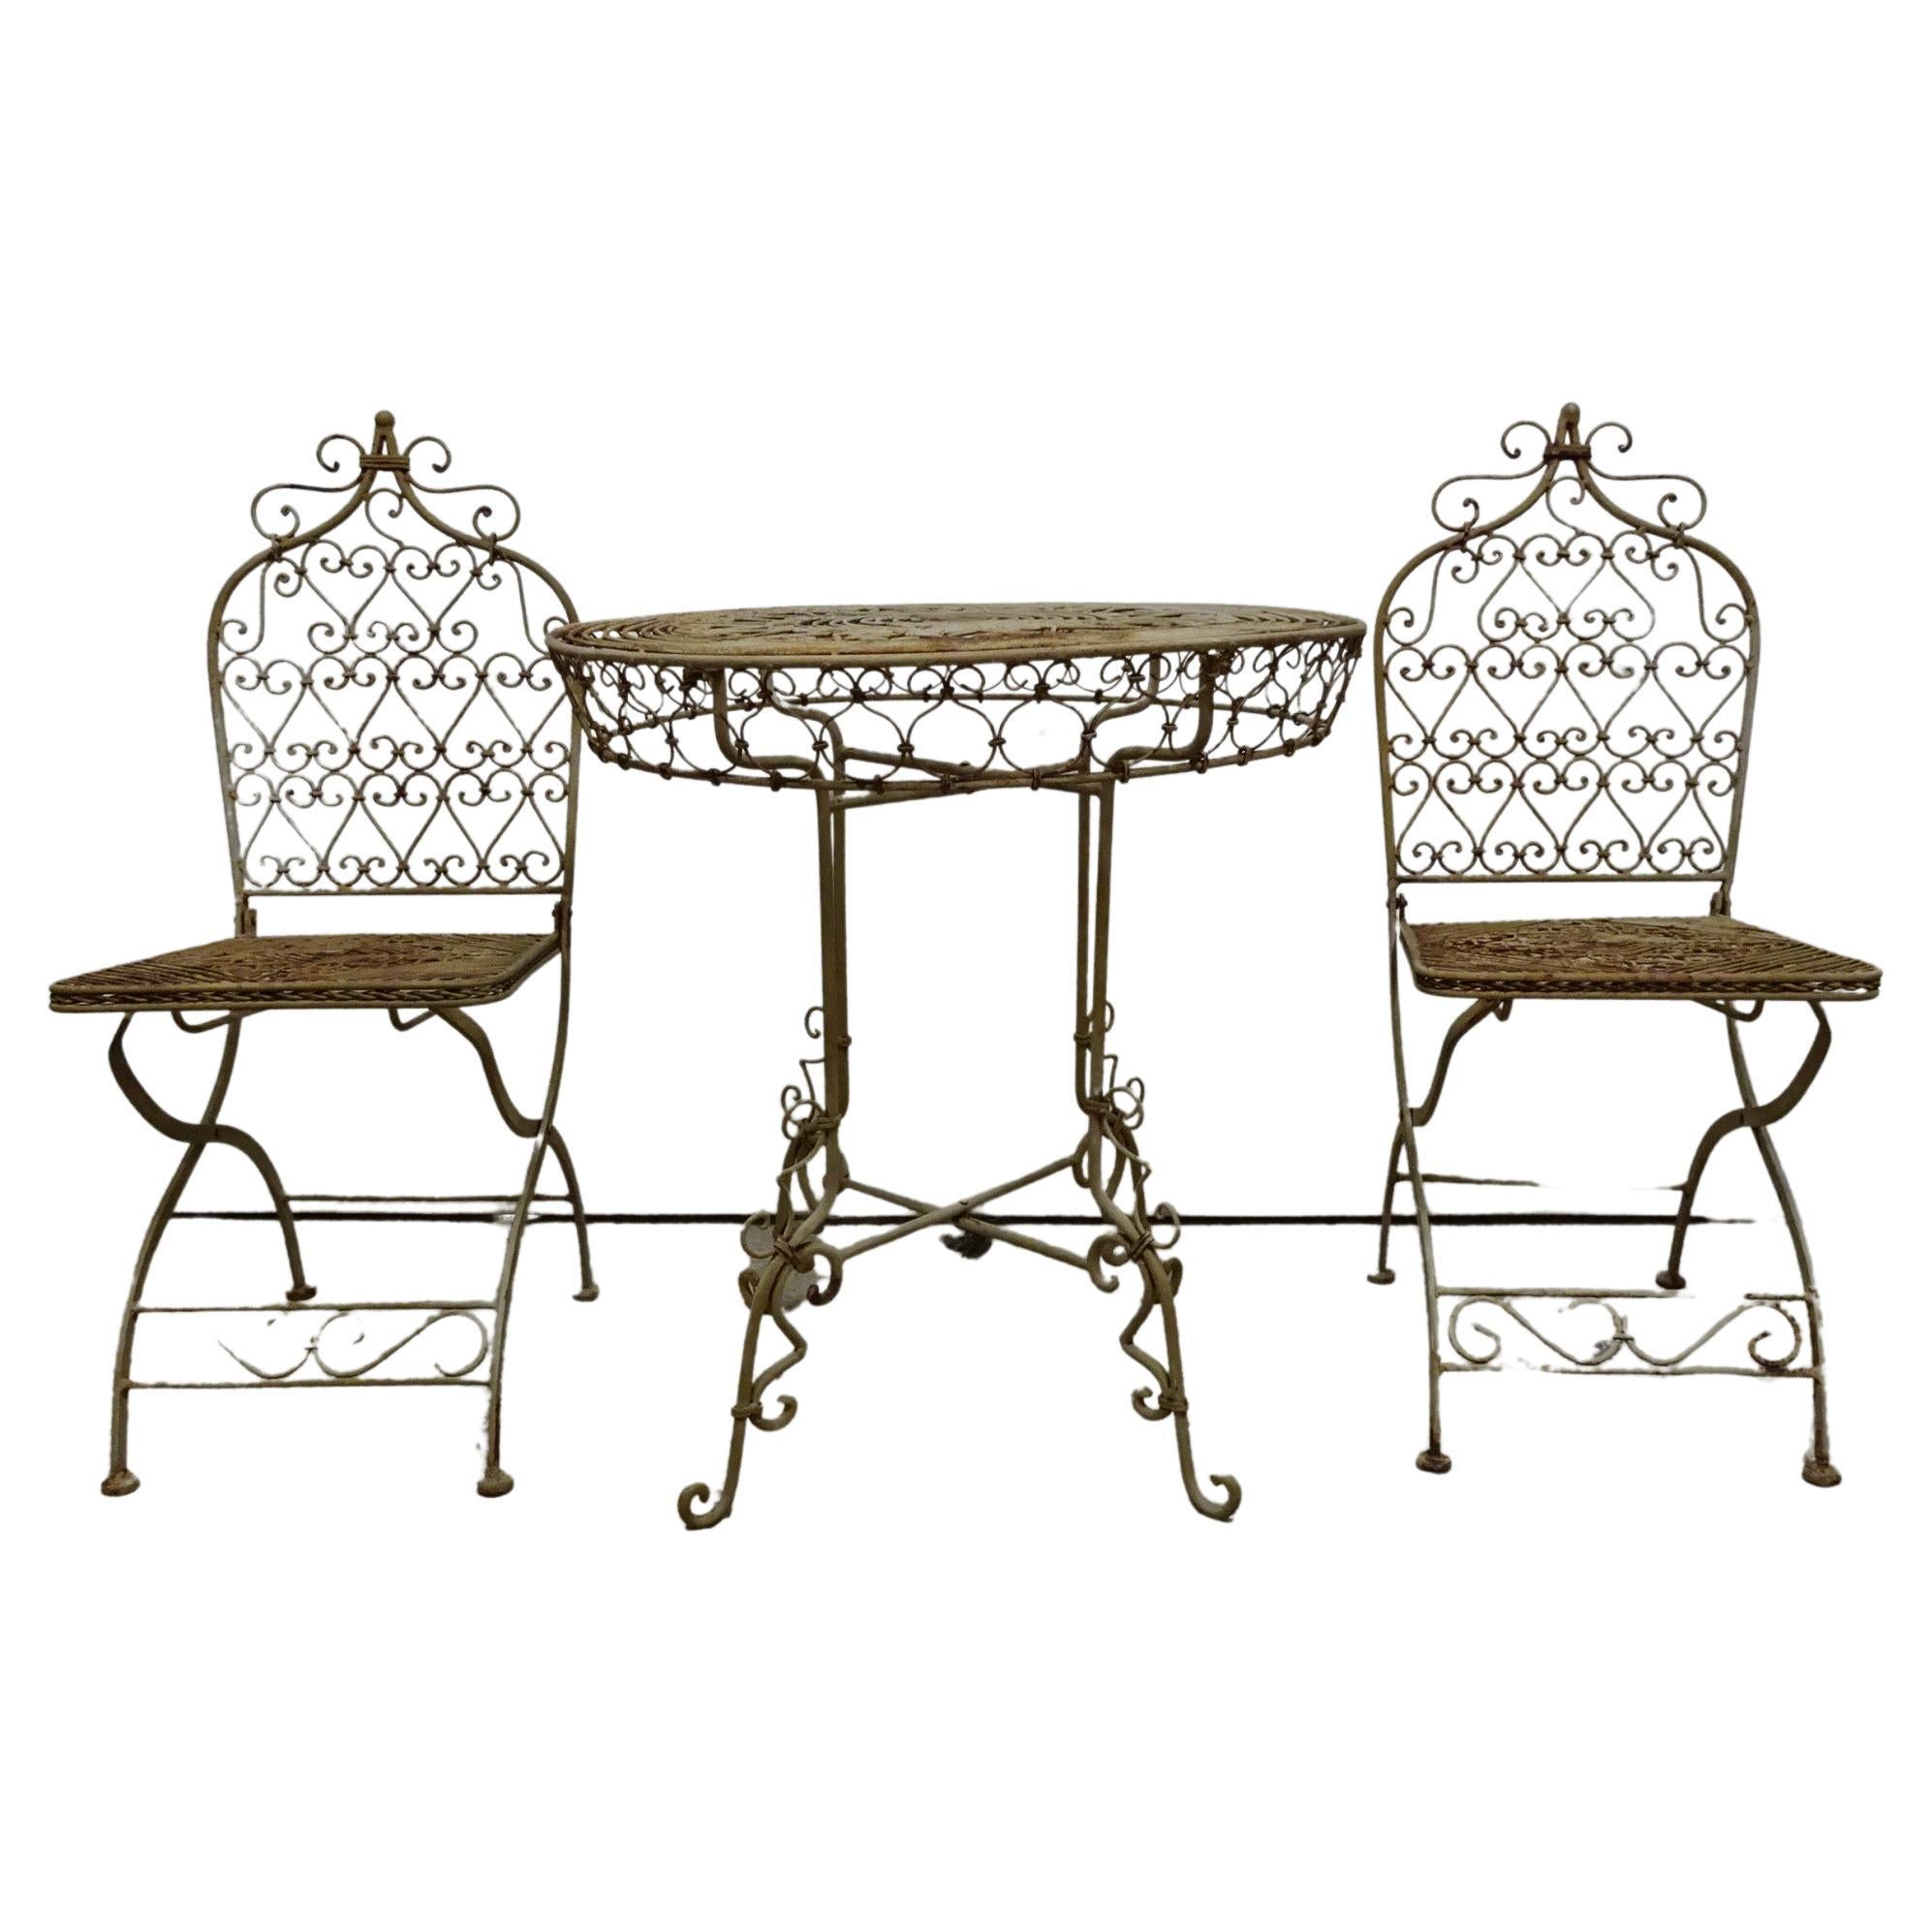 Unique Wrought Iron Table + Chairs